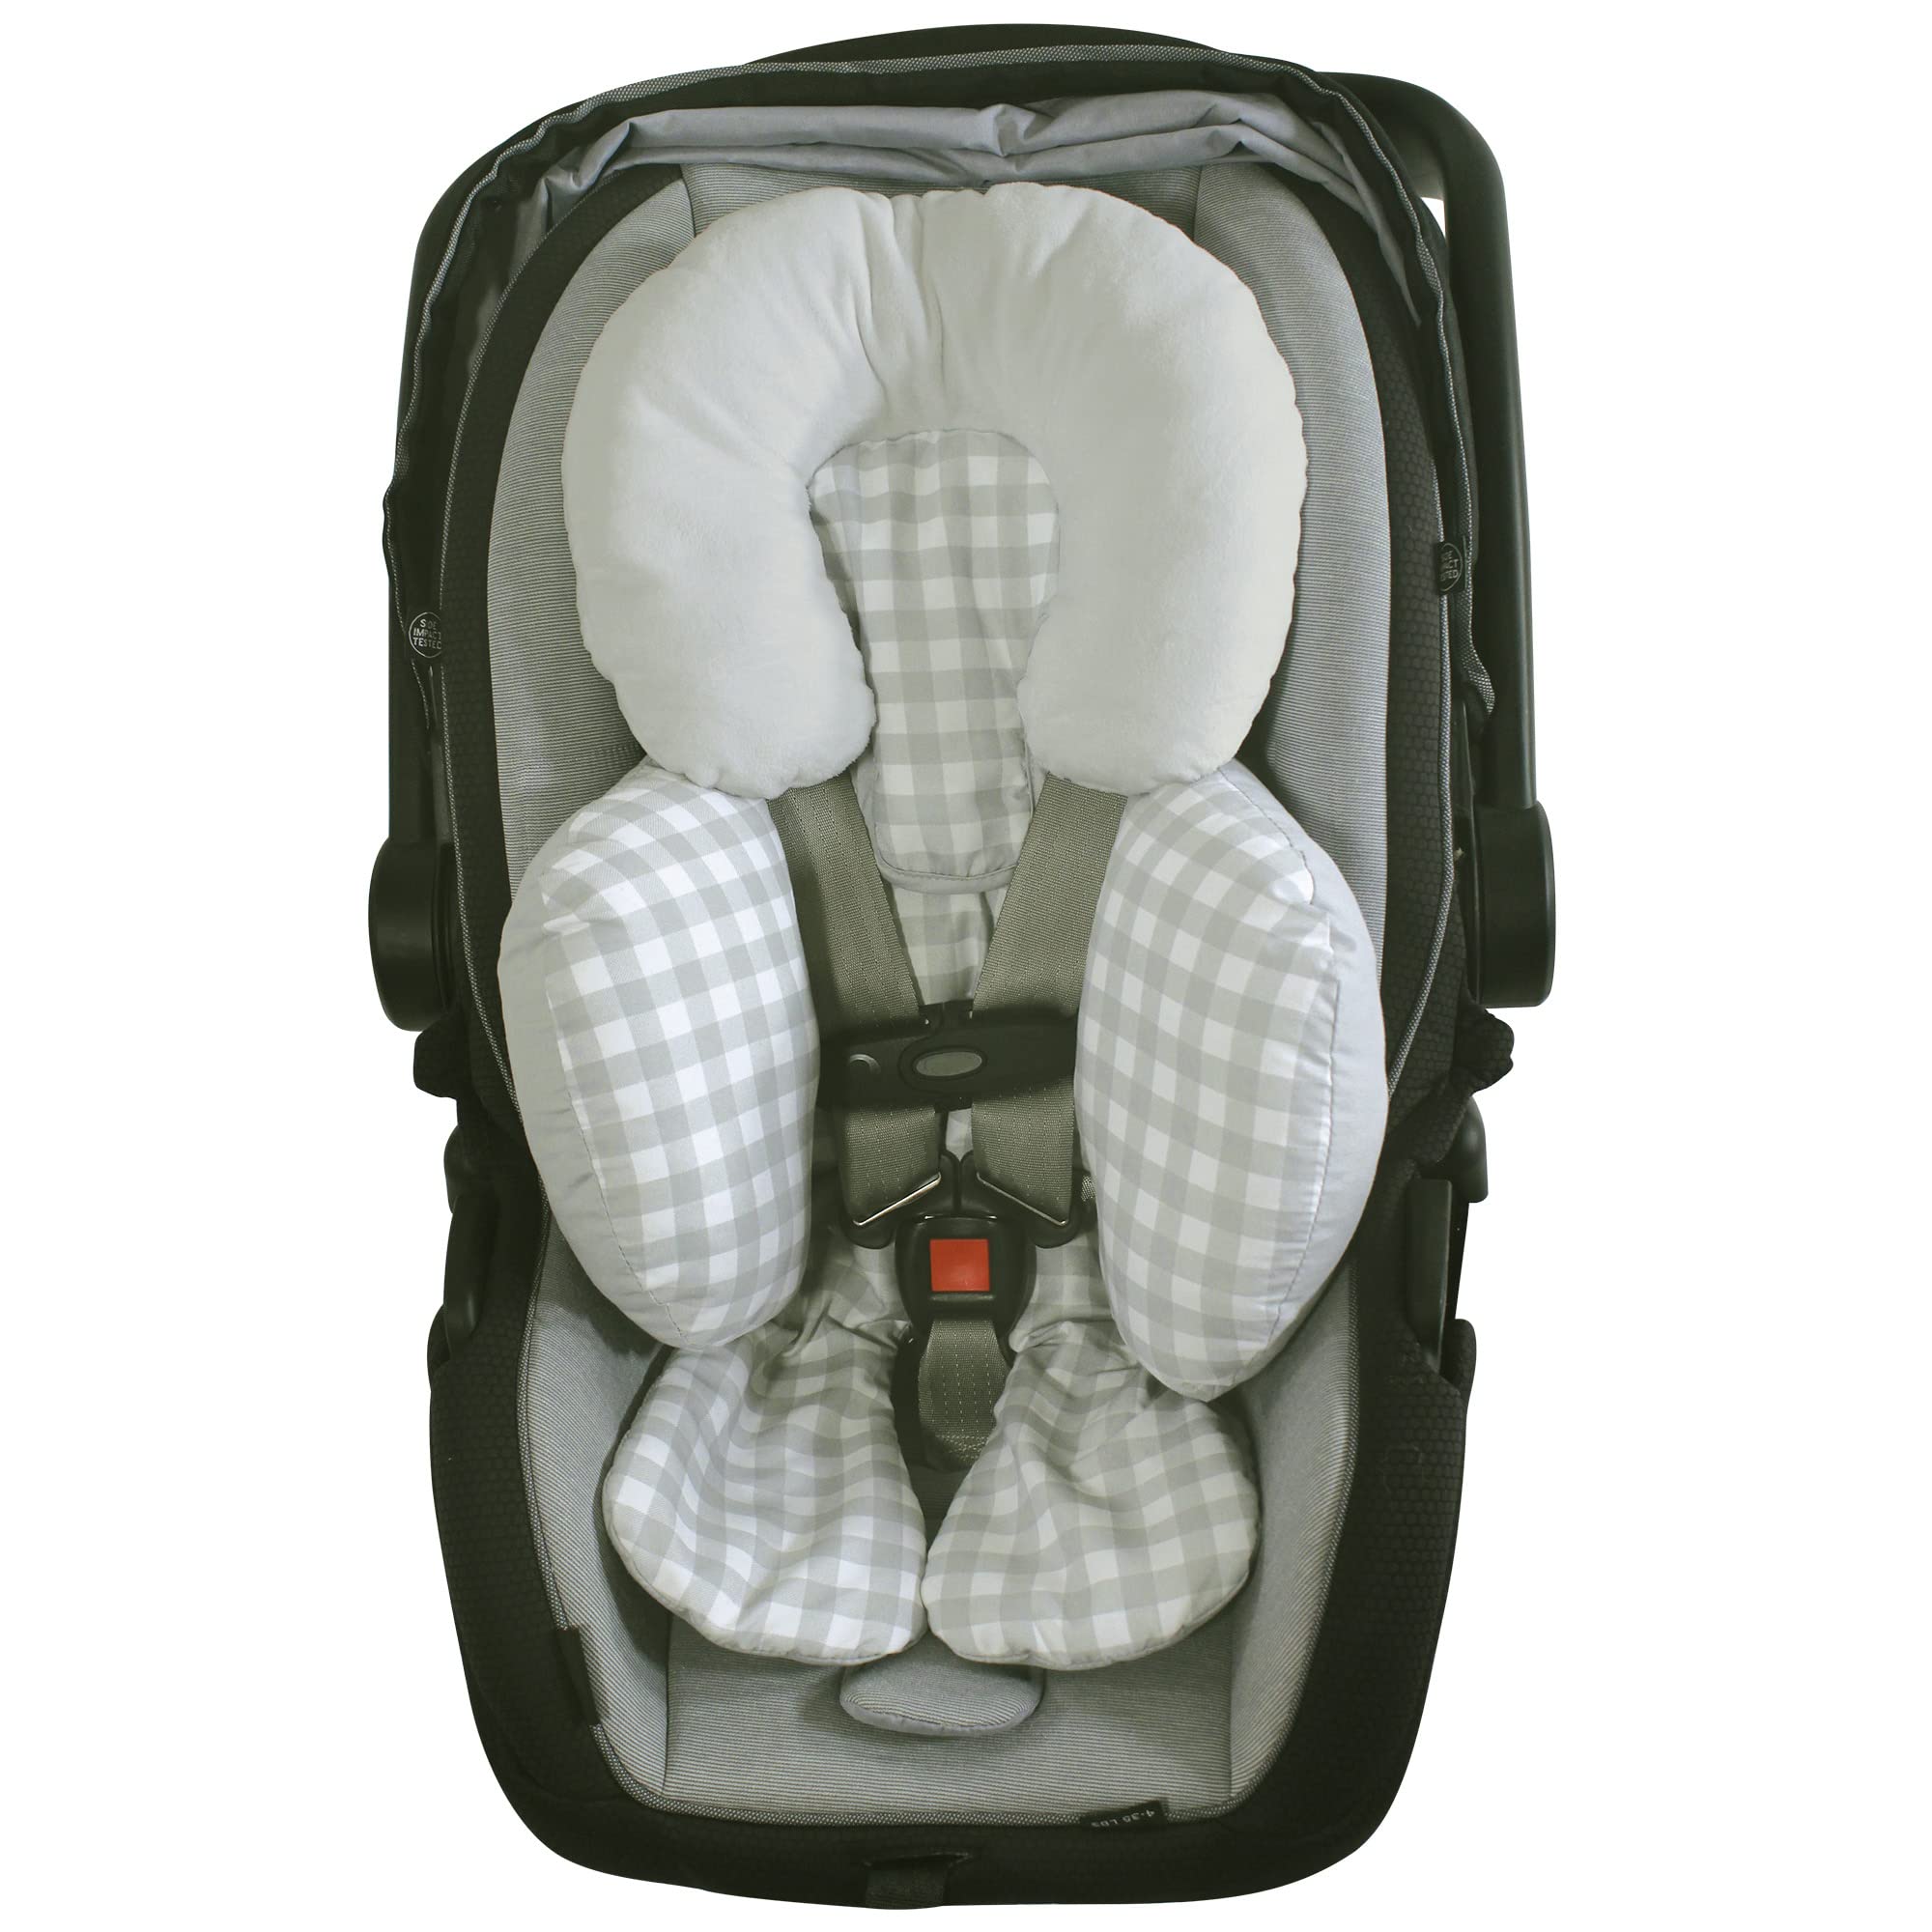 Hudson Baby Unisex Baby Car Seat Body Support Insert, Gray Gingham, One Size